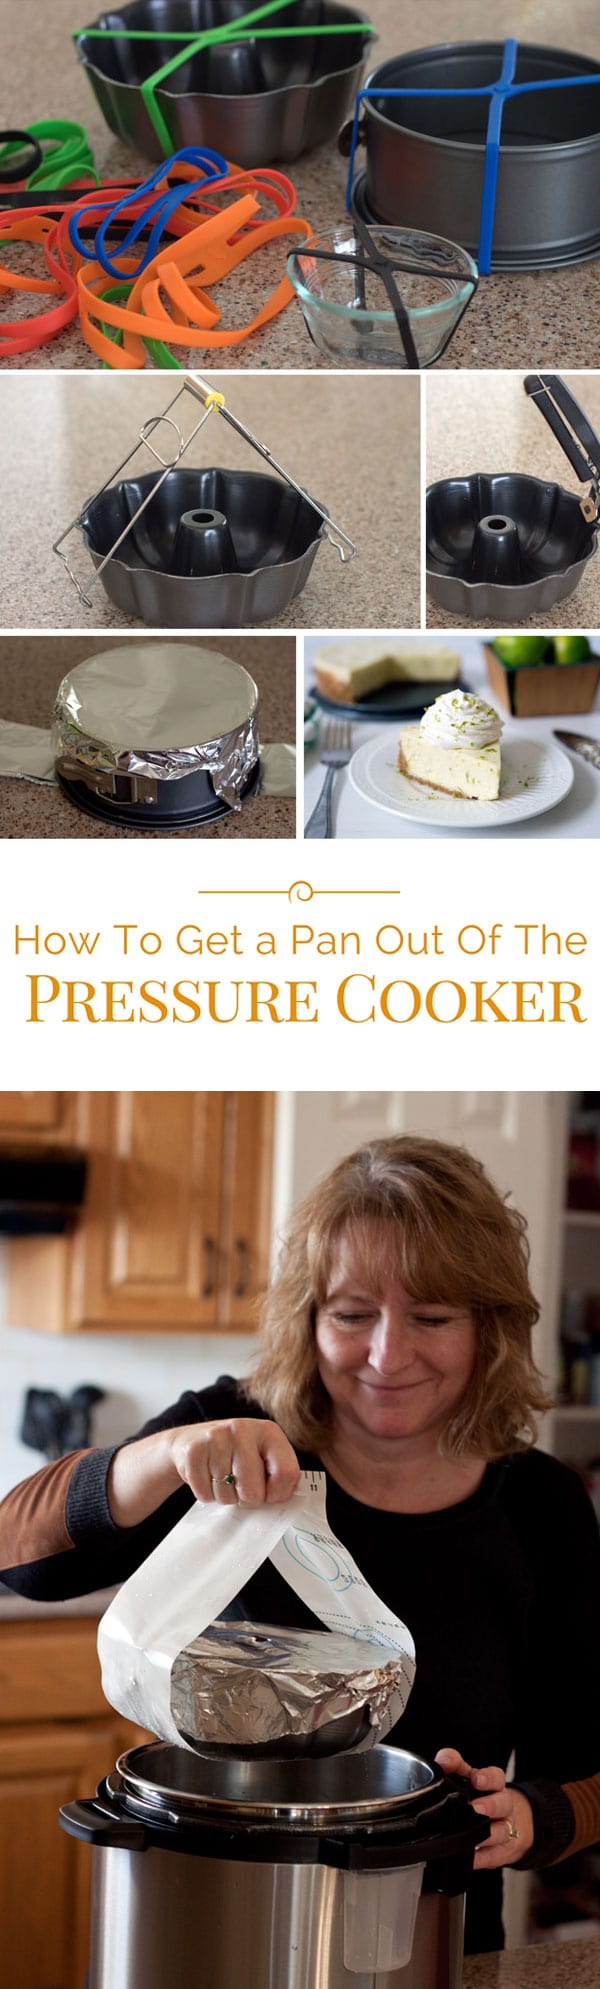 Need to know how to get a pan out of the pressure cooker? Using electric pressure cookers and multi-cookers like an Instant Pot is easy, and removing a pan from a pressure cooker is easy, too!